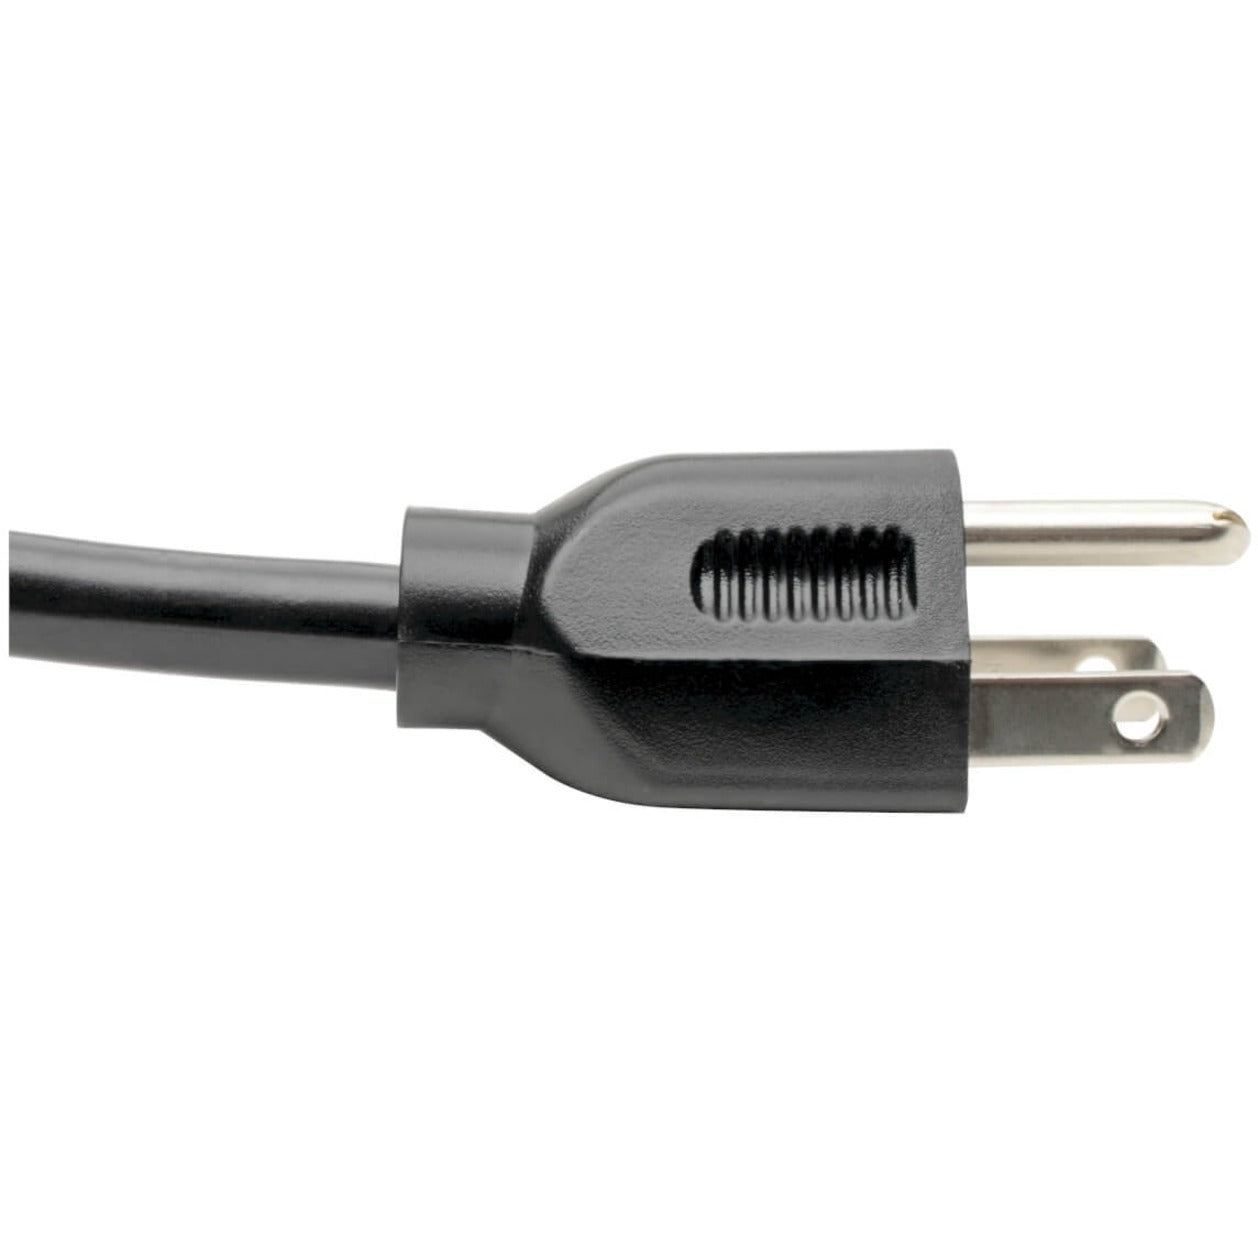 Tripp Lite P019-004 4-ft. Heavy Duty 14AWG Power Cord, 5-15P to C15